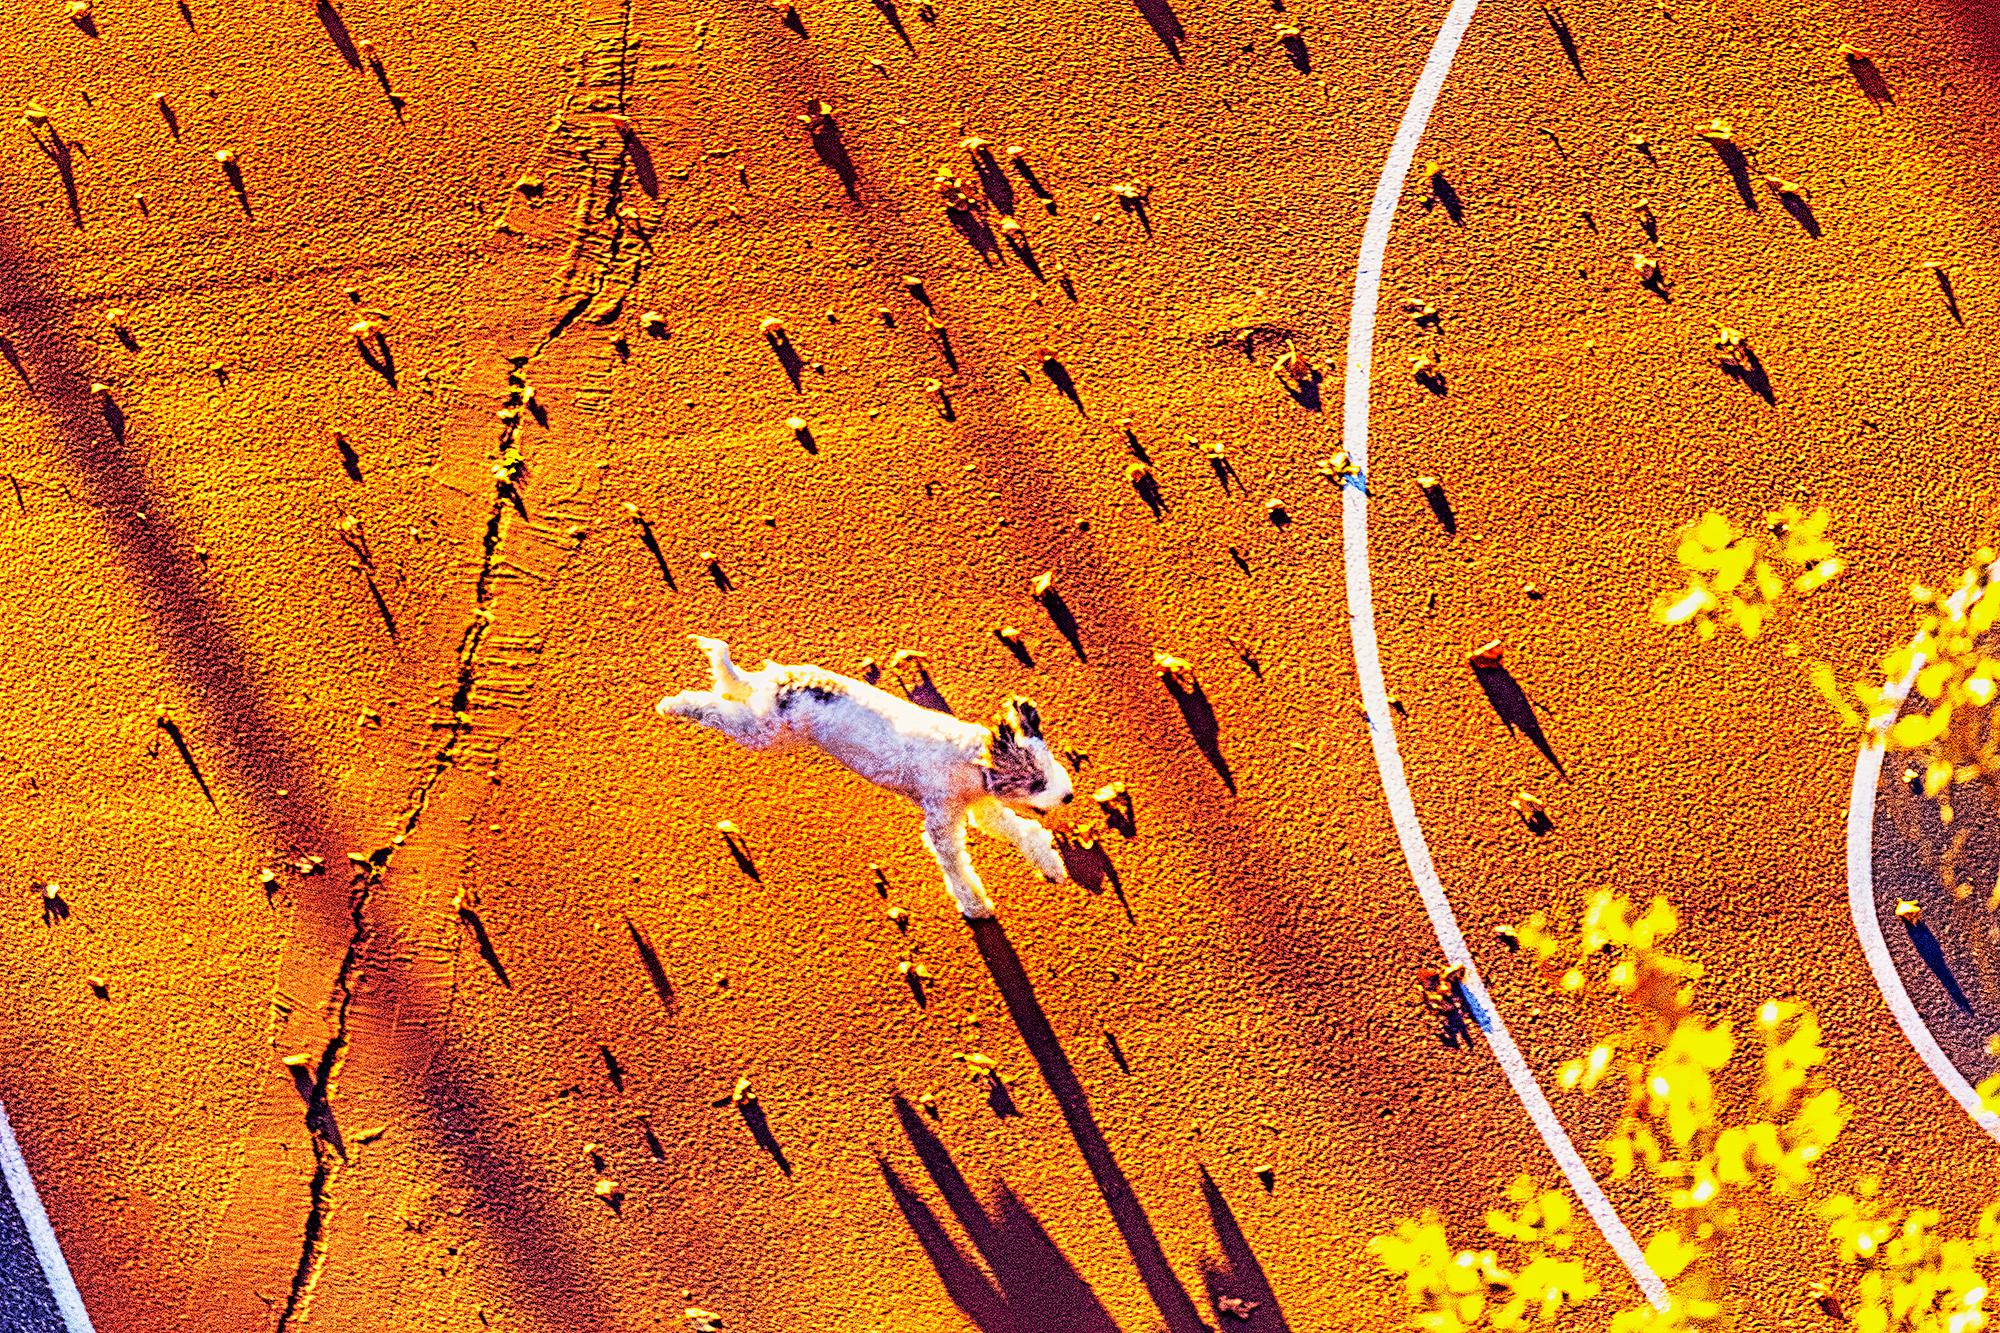 Mitchell Funk Color Photograph - Jumping Dog in Golden Light 